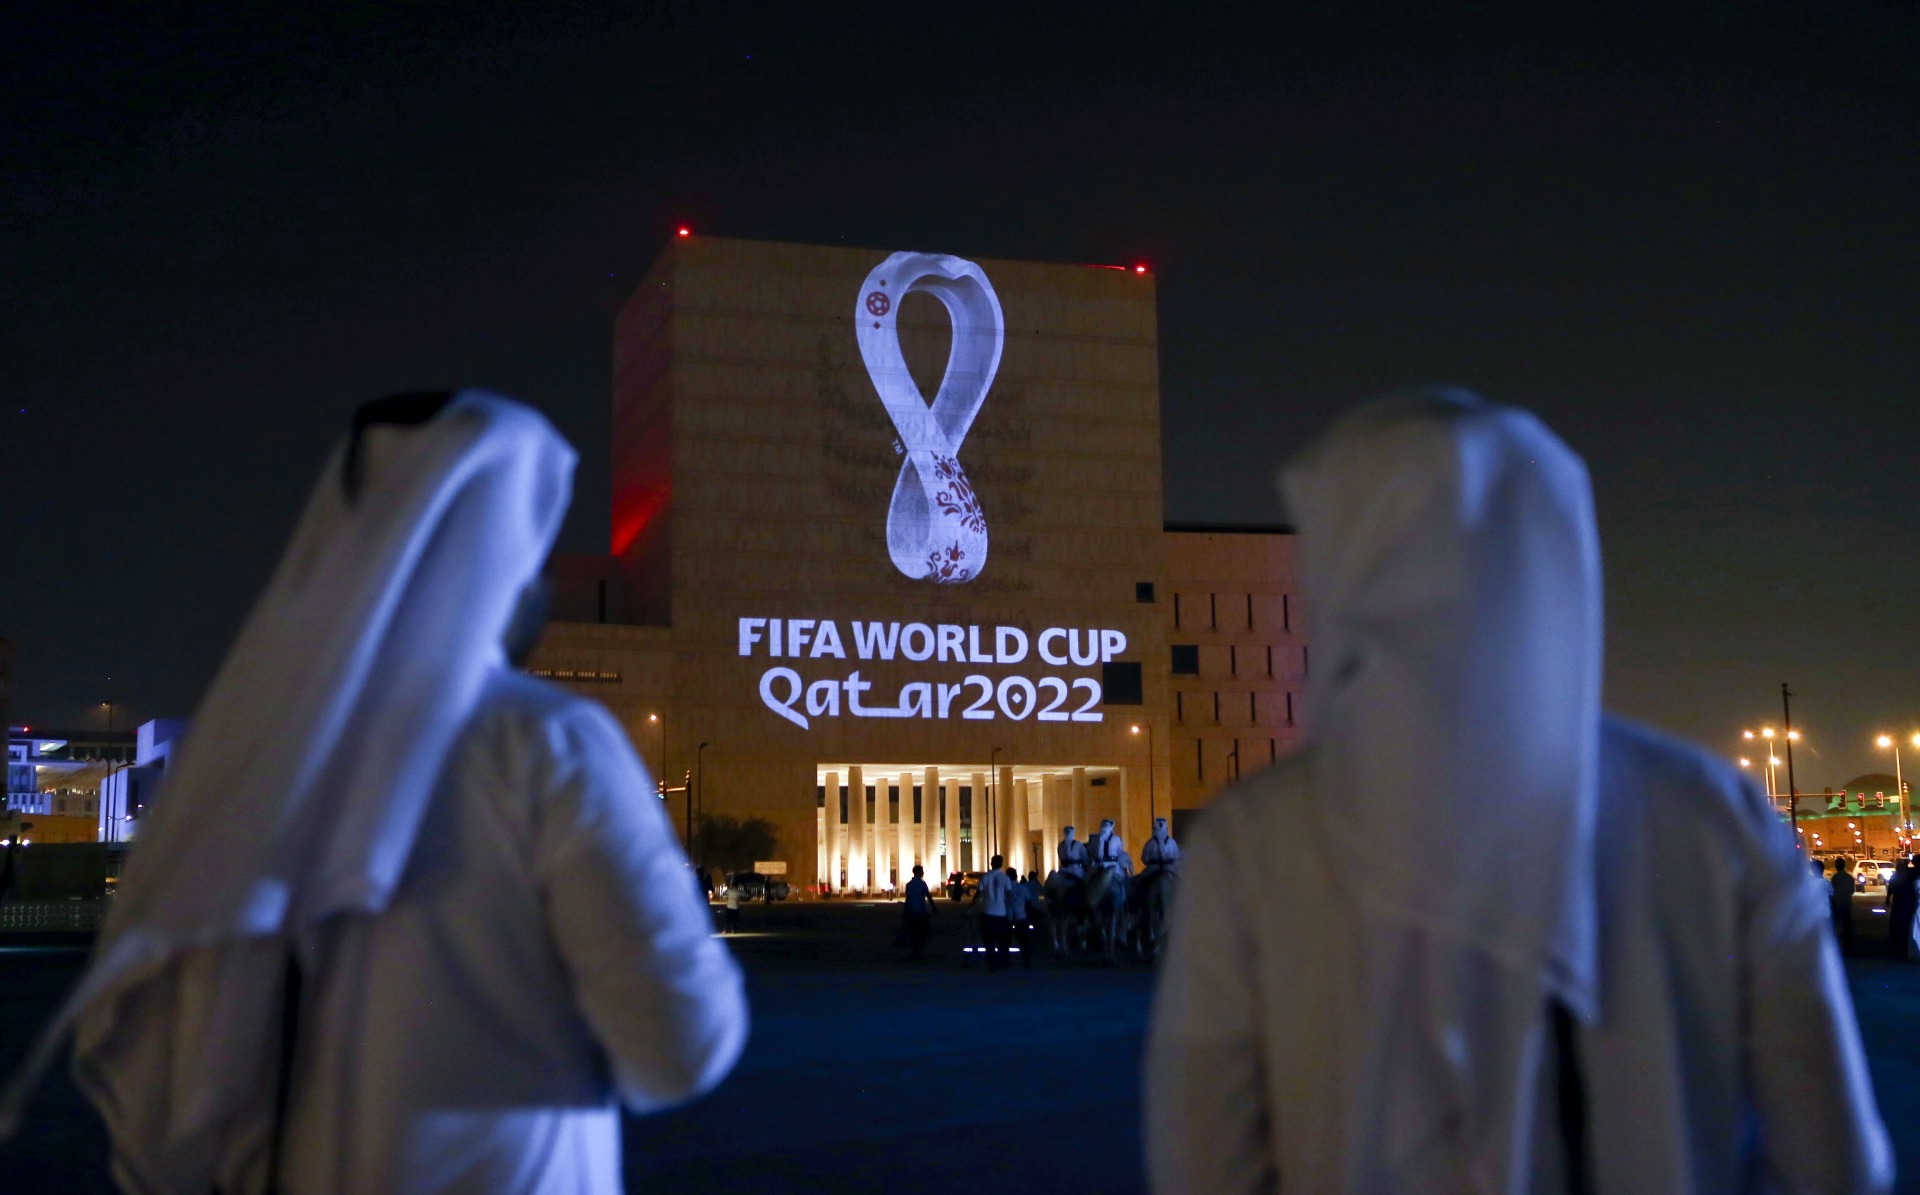 Problems of the 2022 World Cup in Qatar